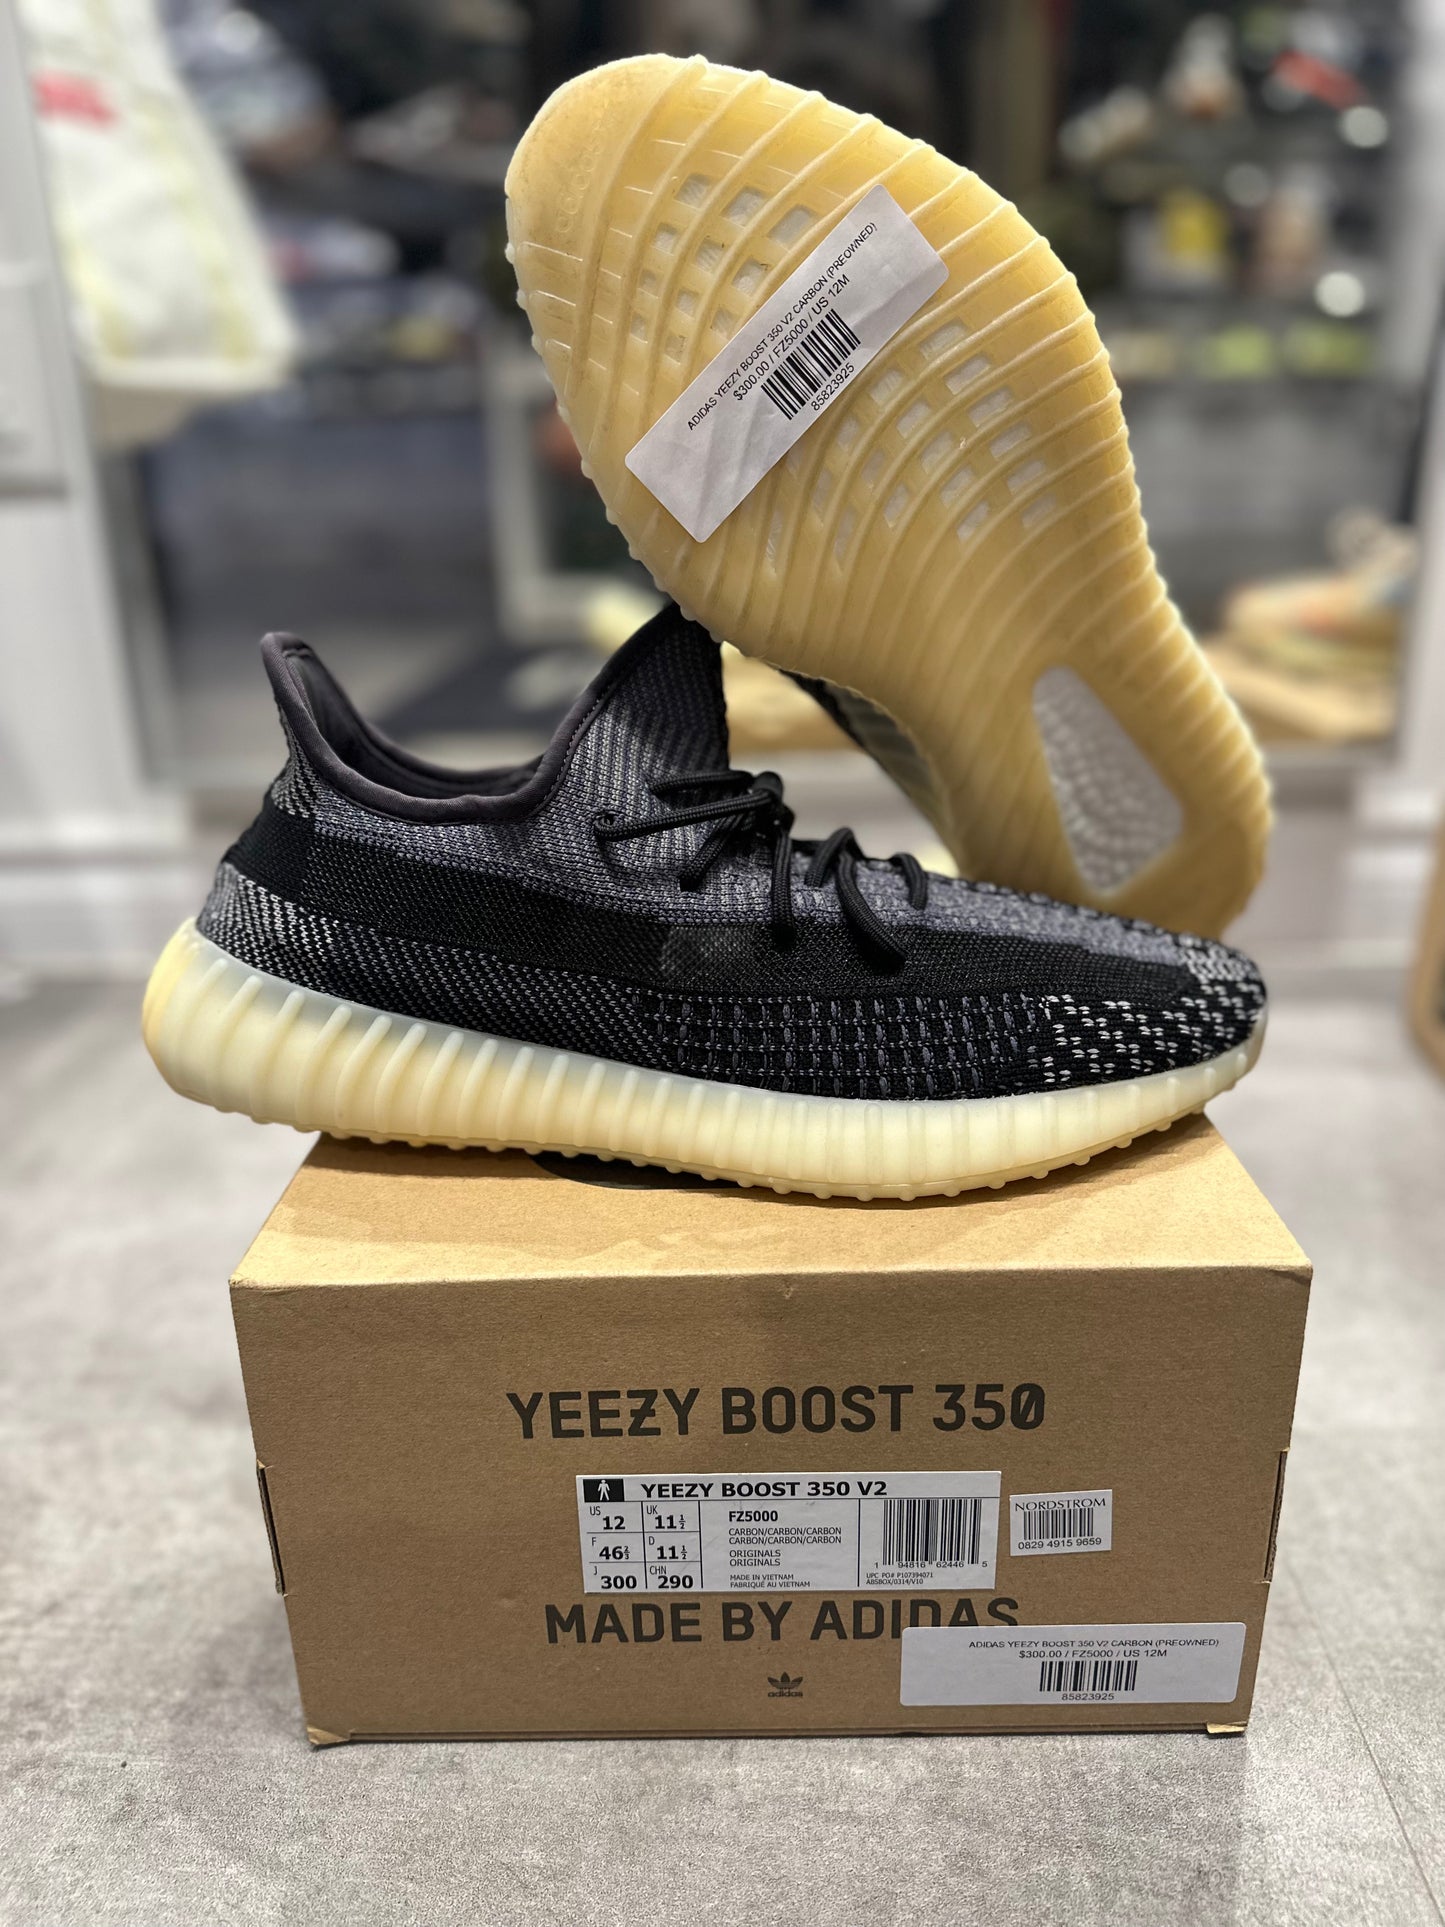 Adidas Yeezy Boost 350 V2 Carbon (Preowned Size 12)